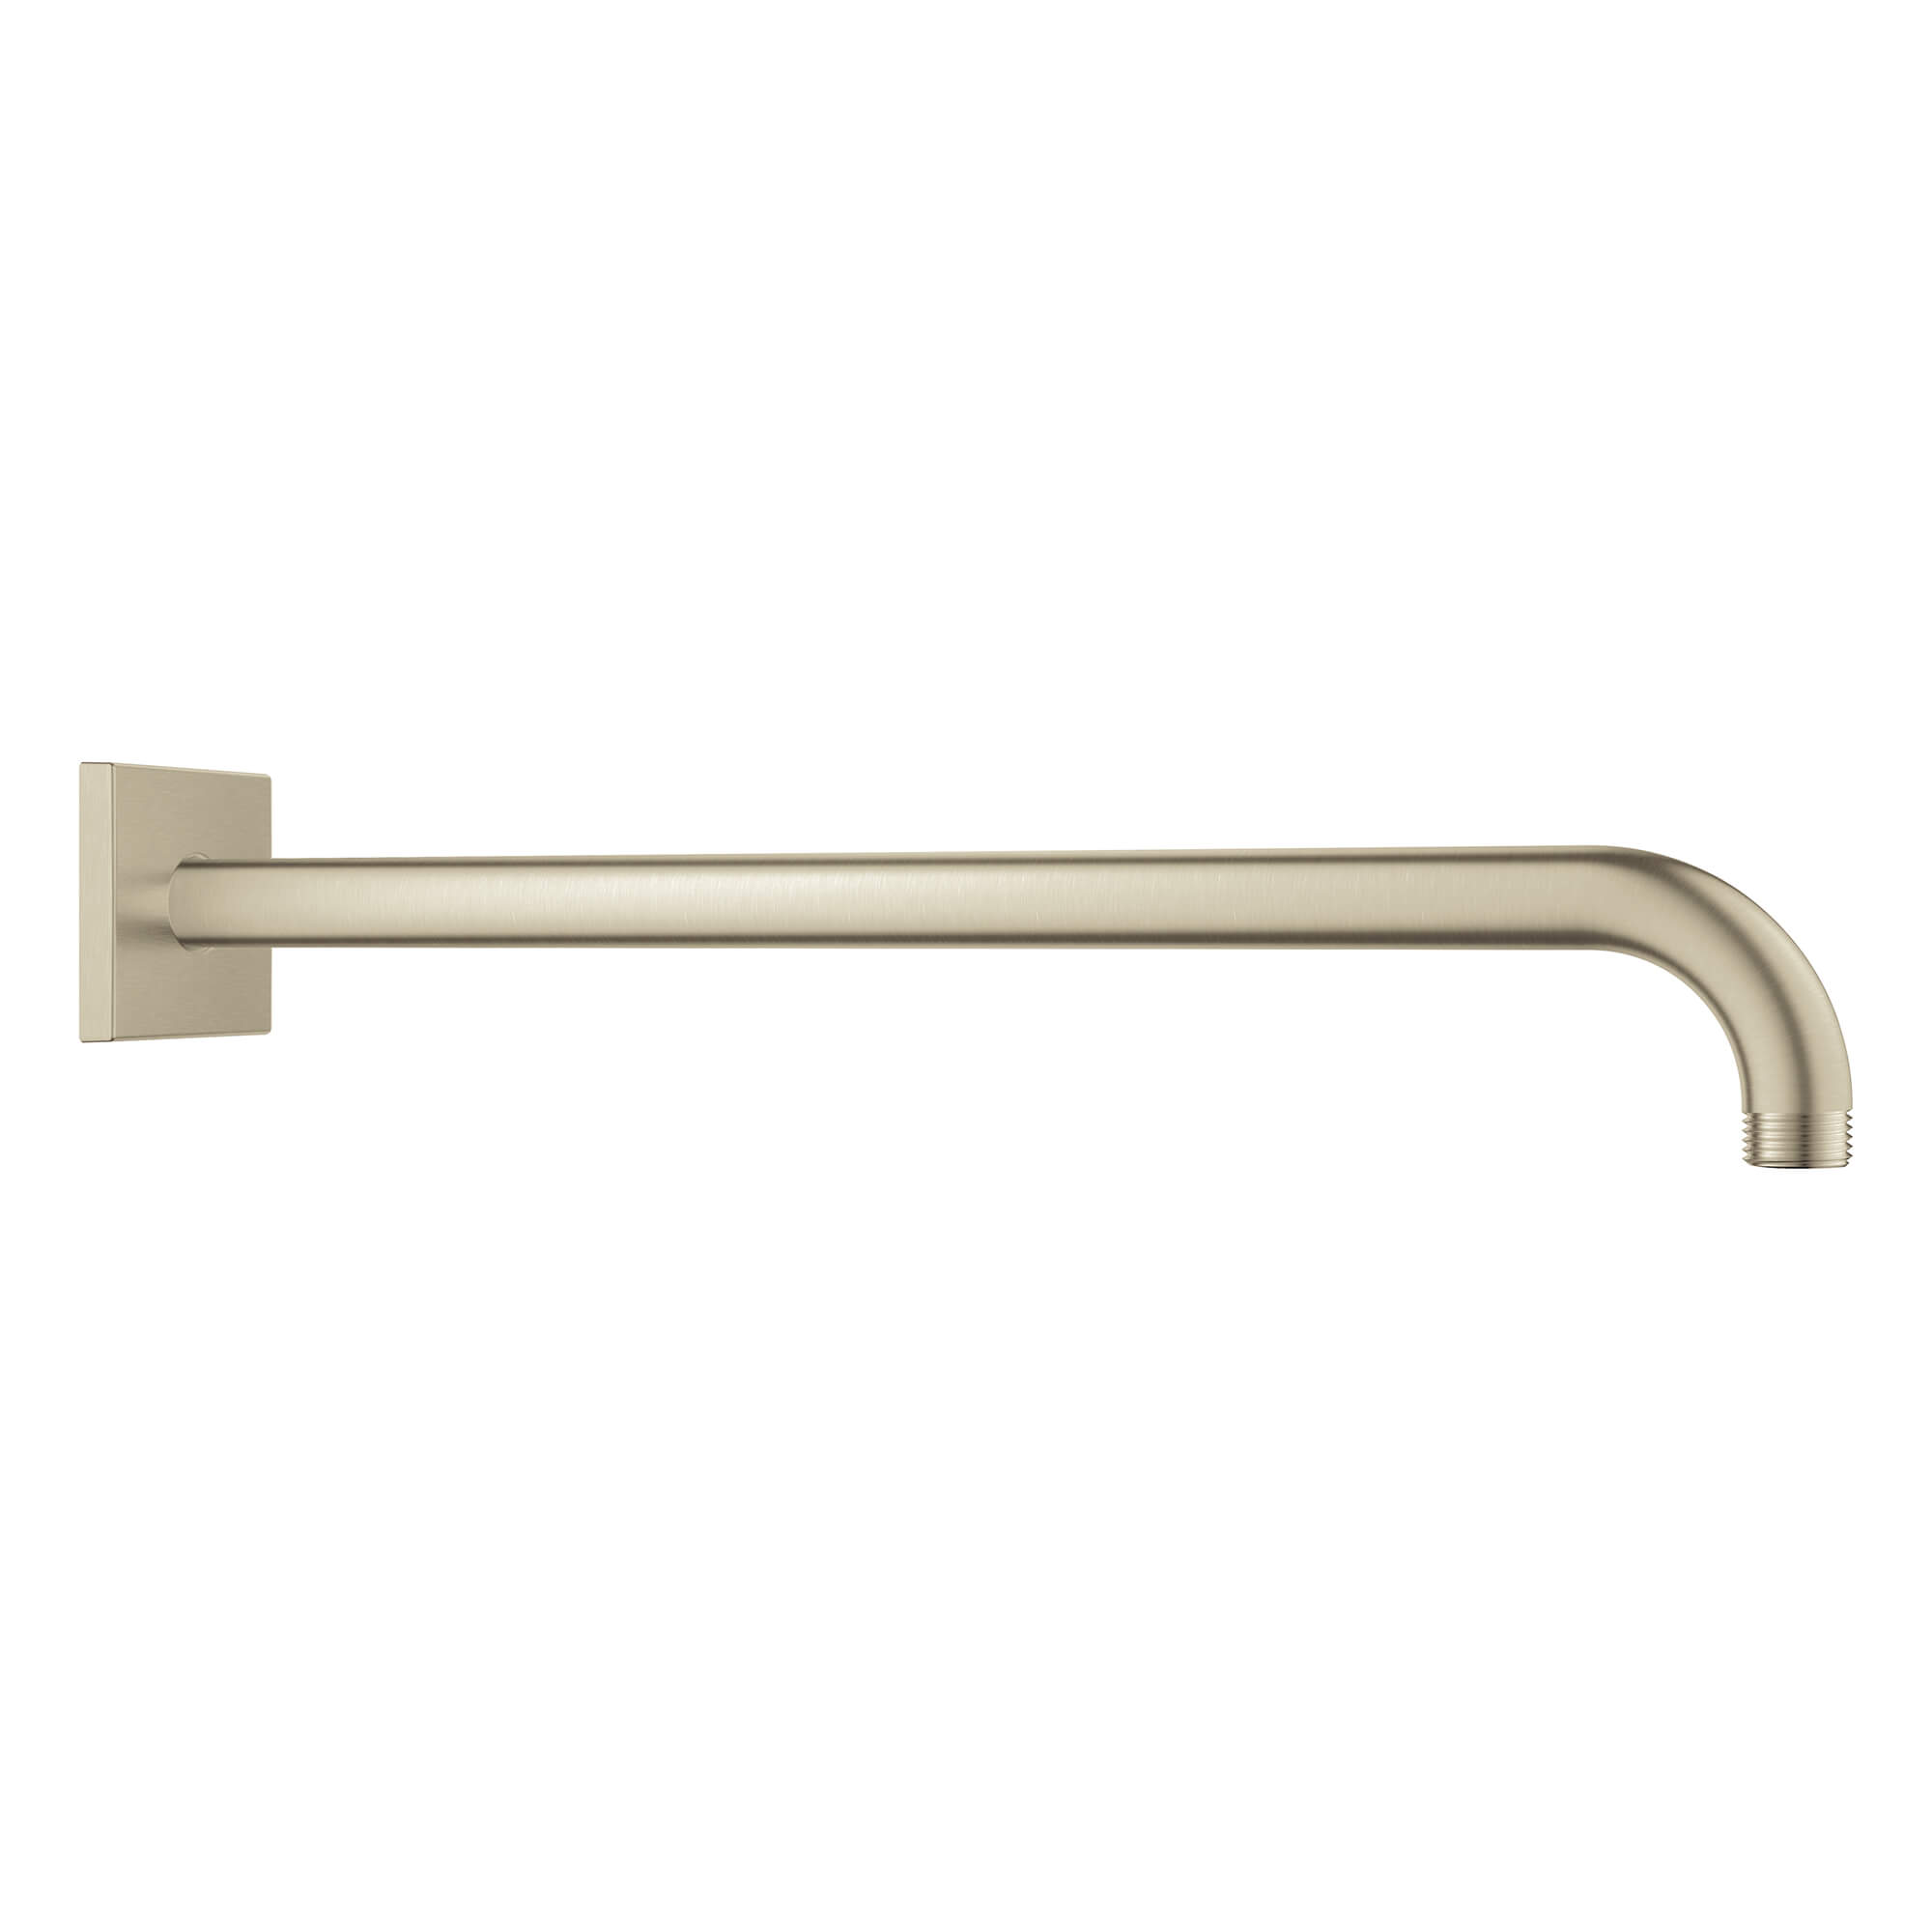 Mirabelle MIRRSA180 18 Shower Arm and Wall Flange - Brushed Nickel